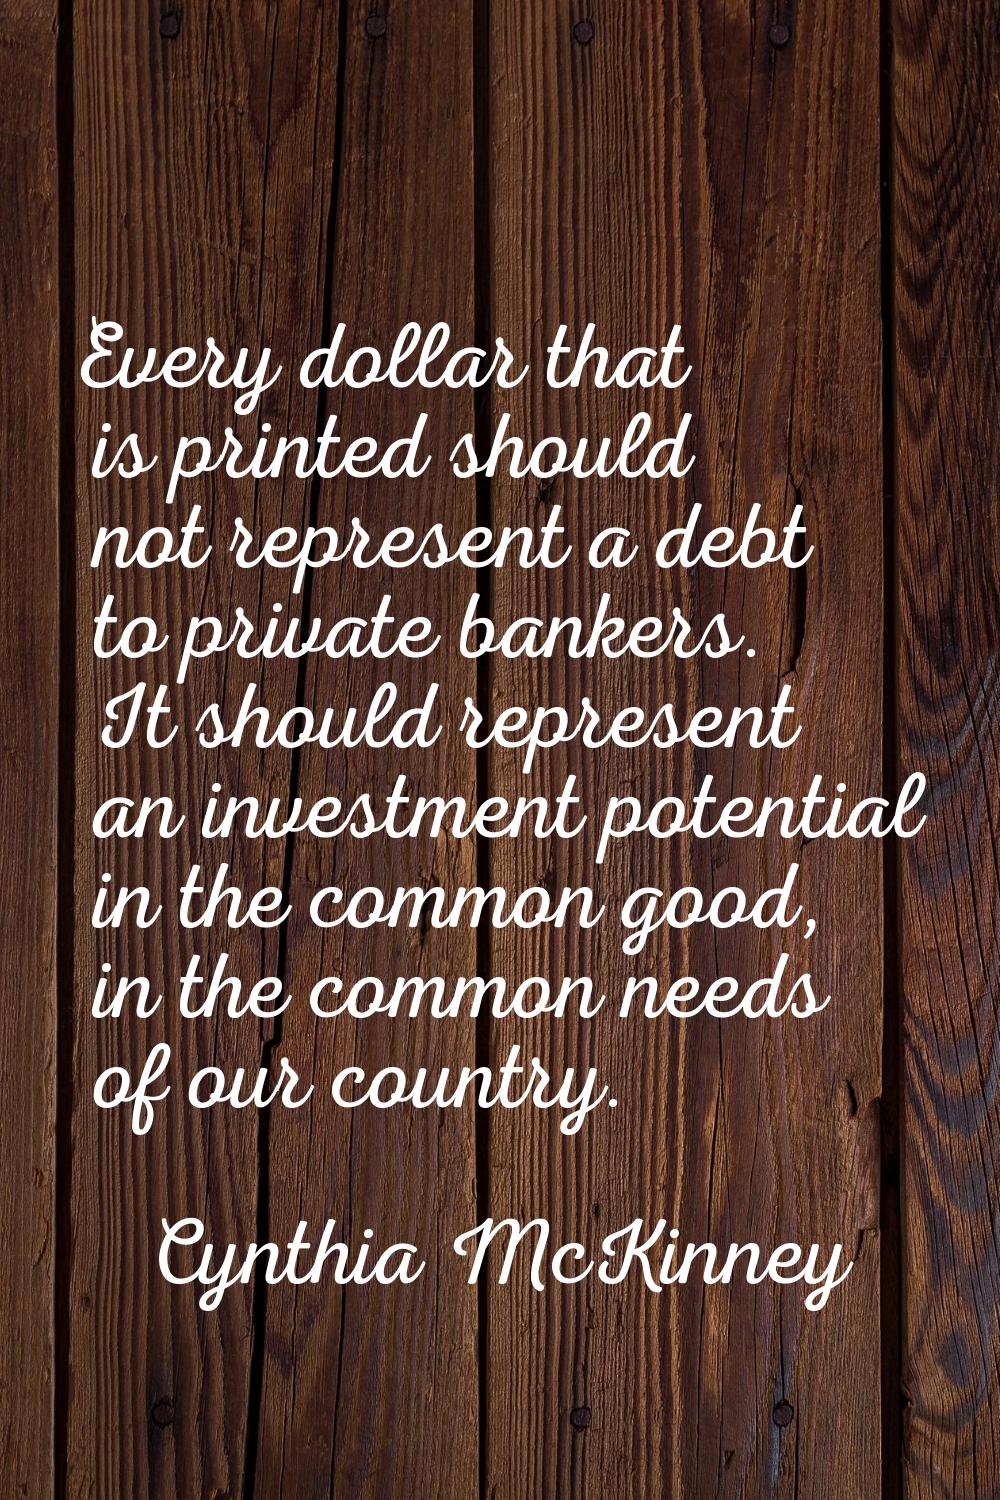 Every dollar that is printed should not represent a debt to private bankers. It should represent an